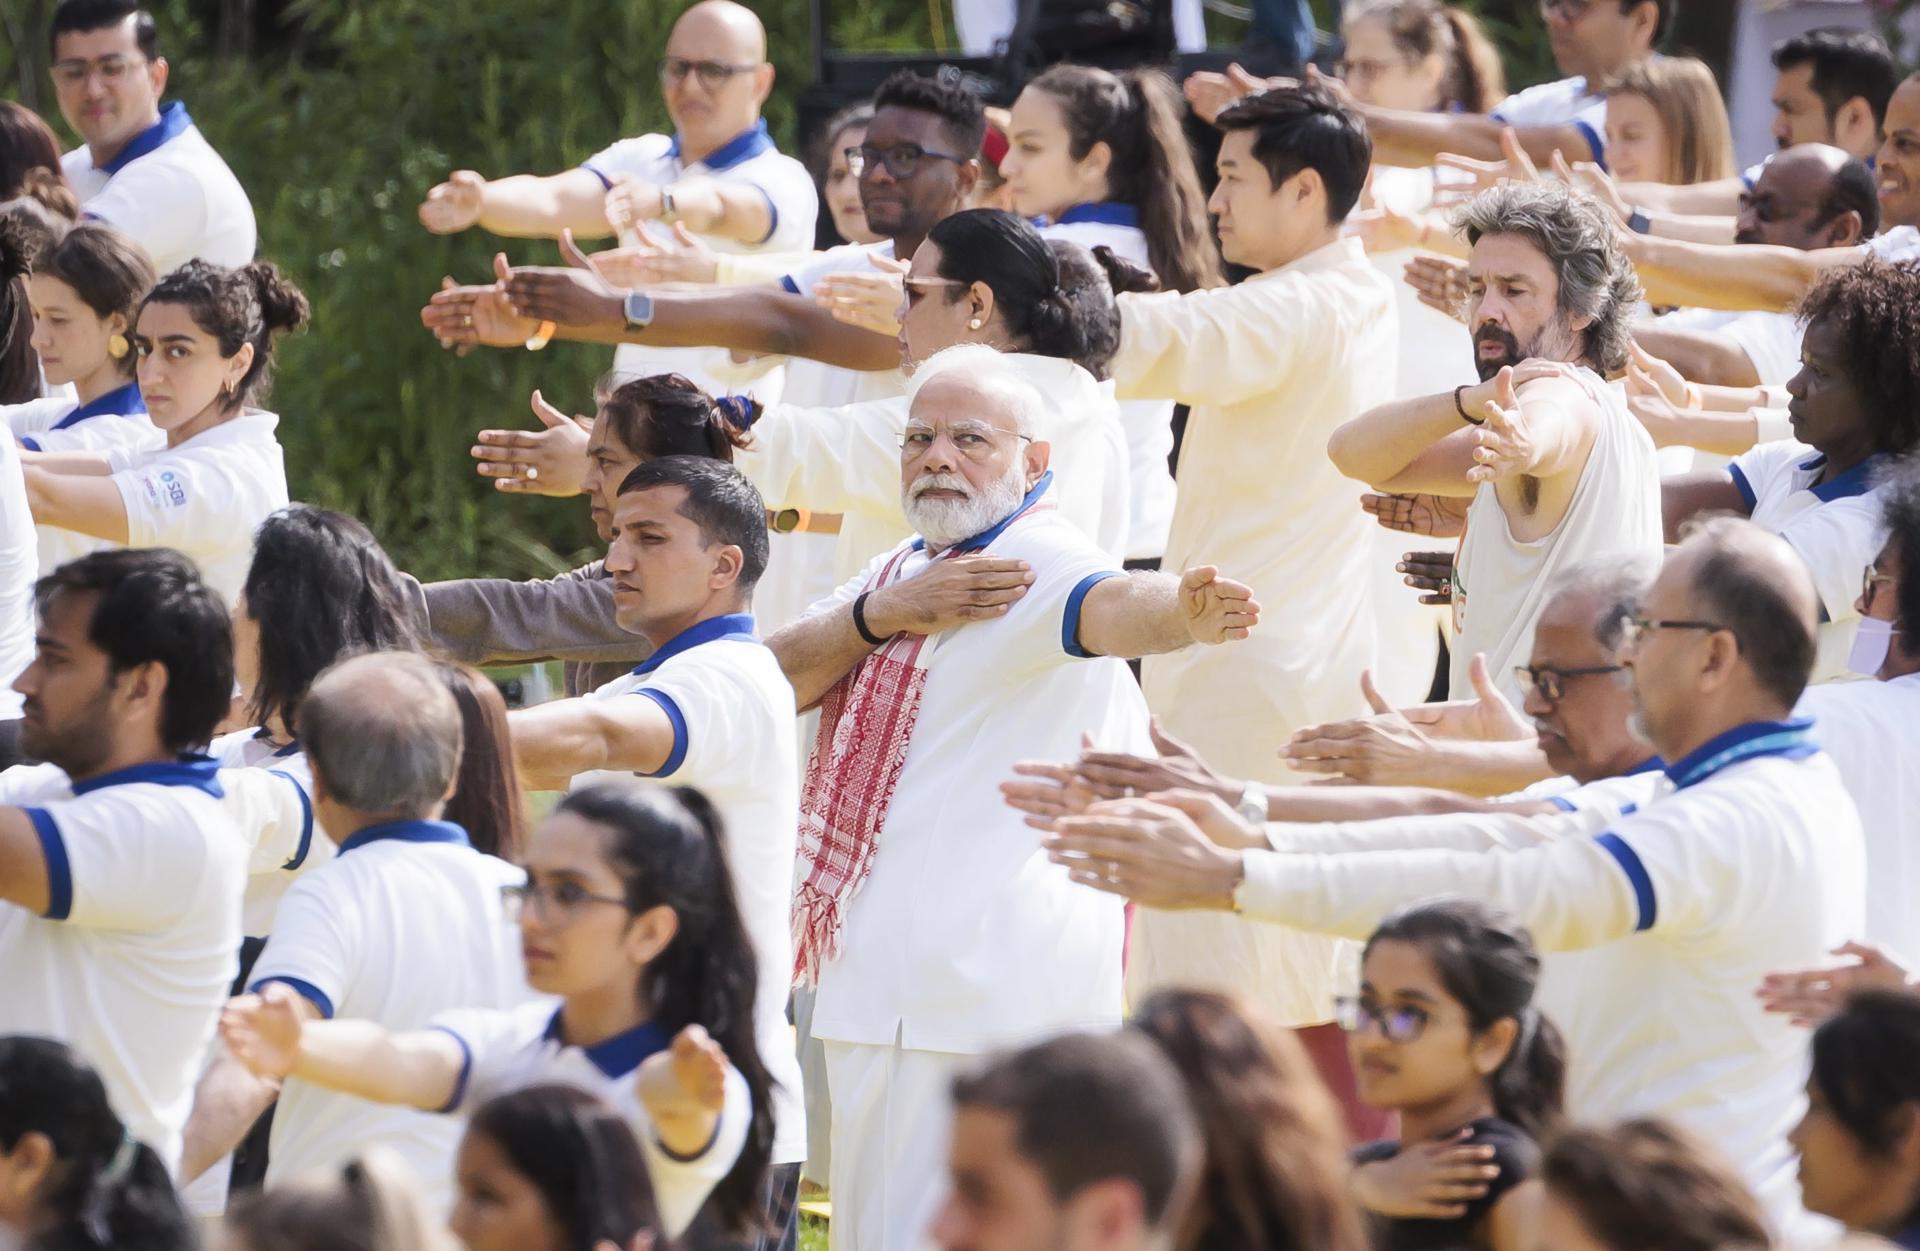 Indian Prime Minister Leads Yoga Day in New York